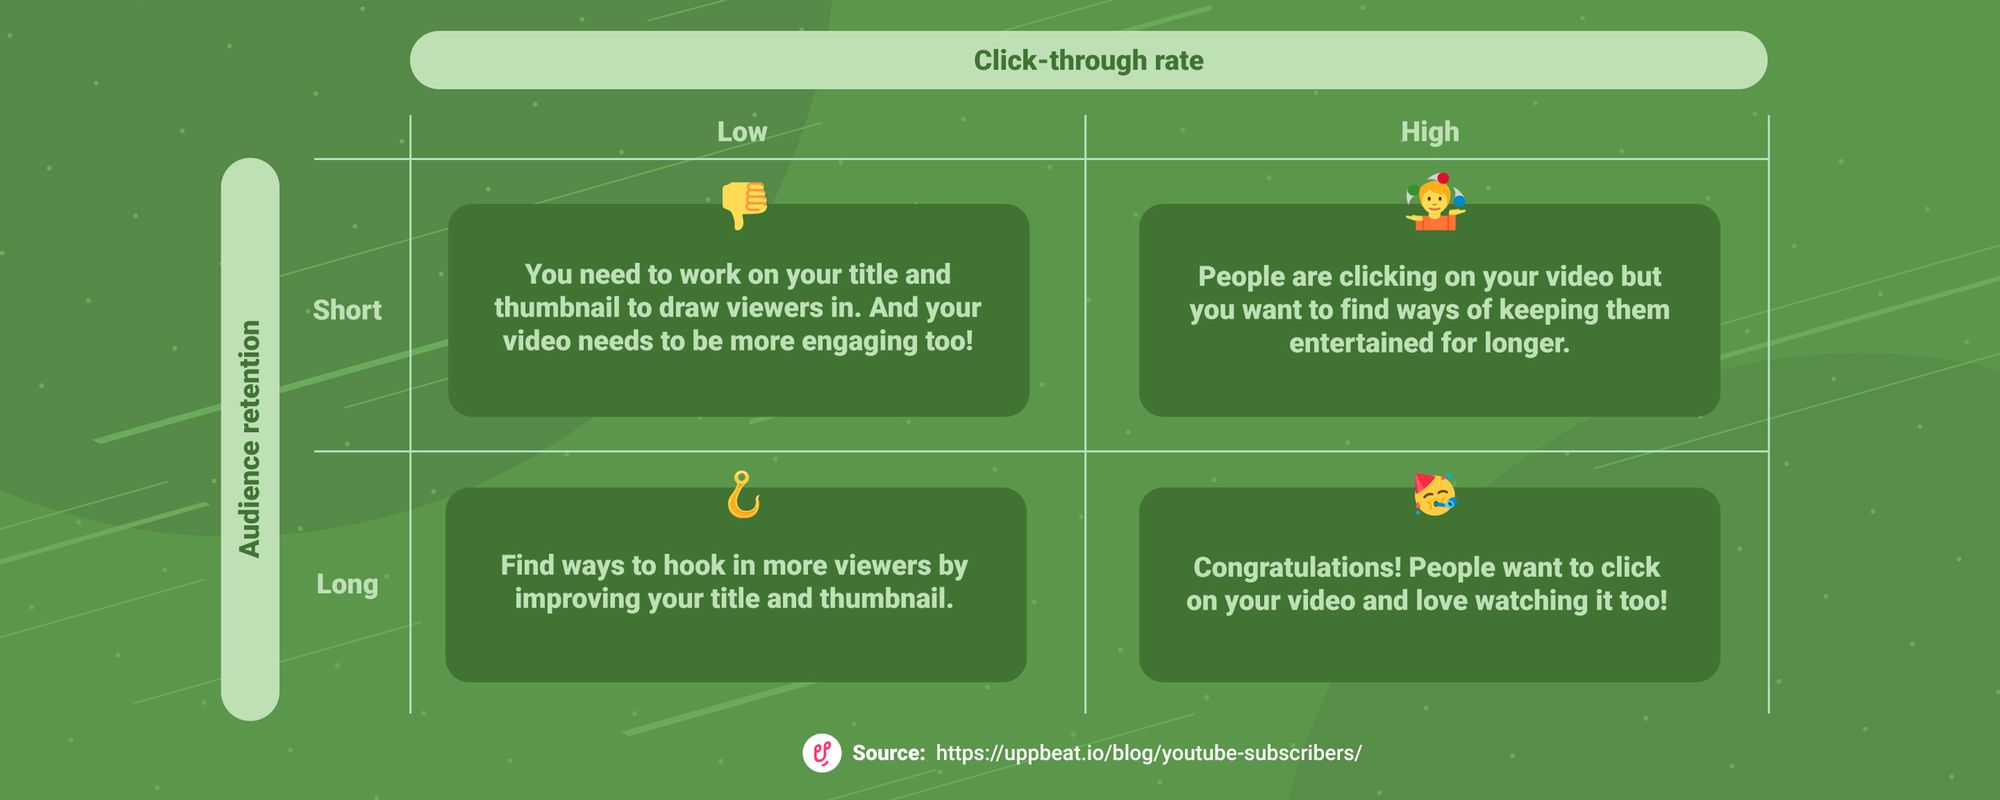 Table showing the relationship between a YouTube video's click-through rate and audience retention, and how creators can use these insights to improve their videos.